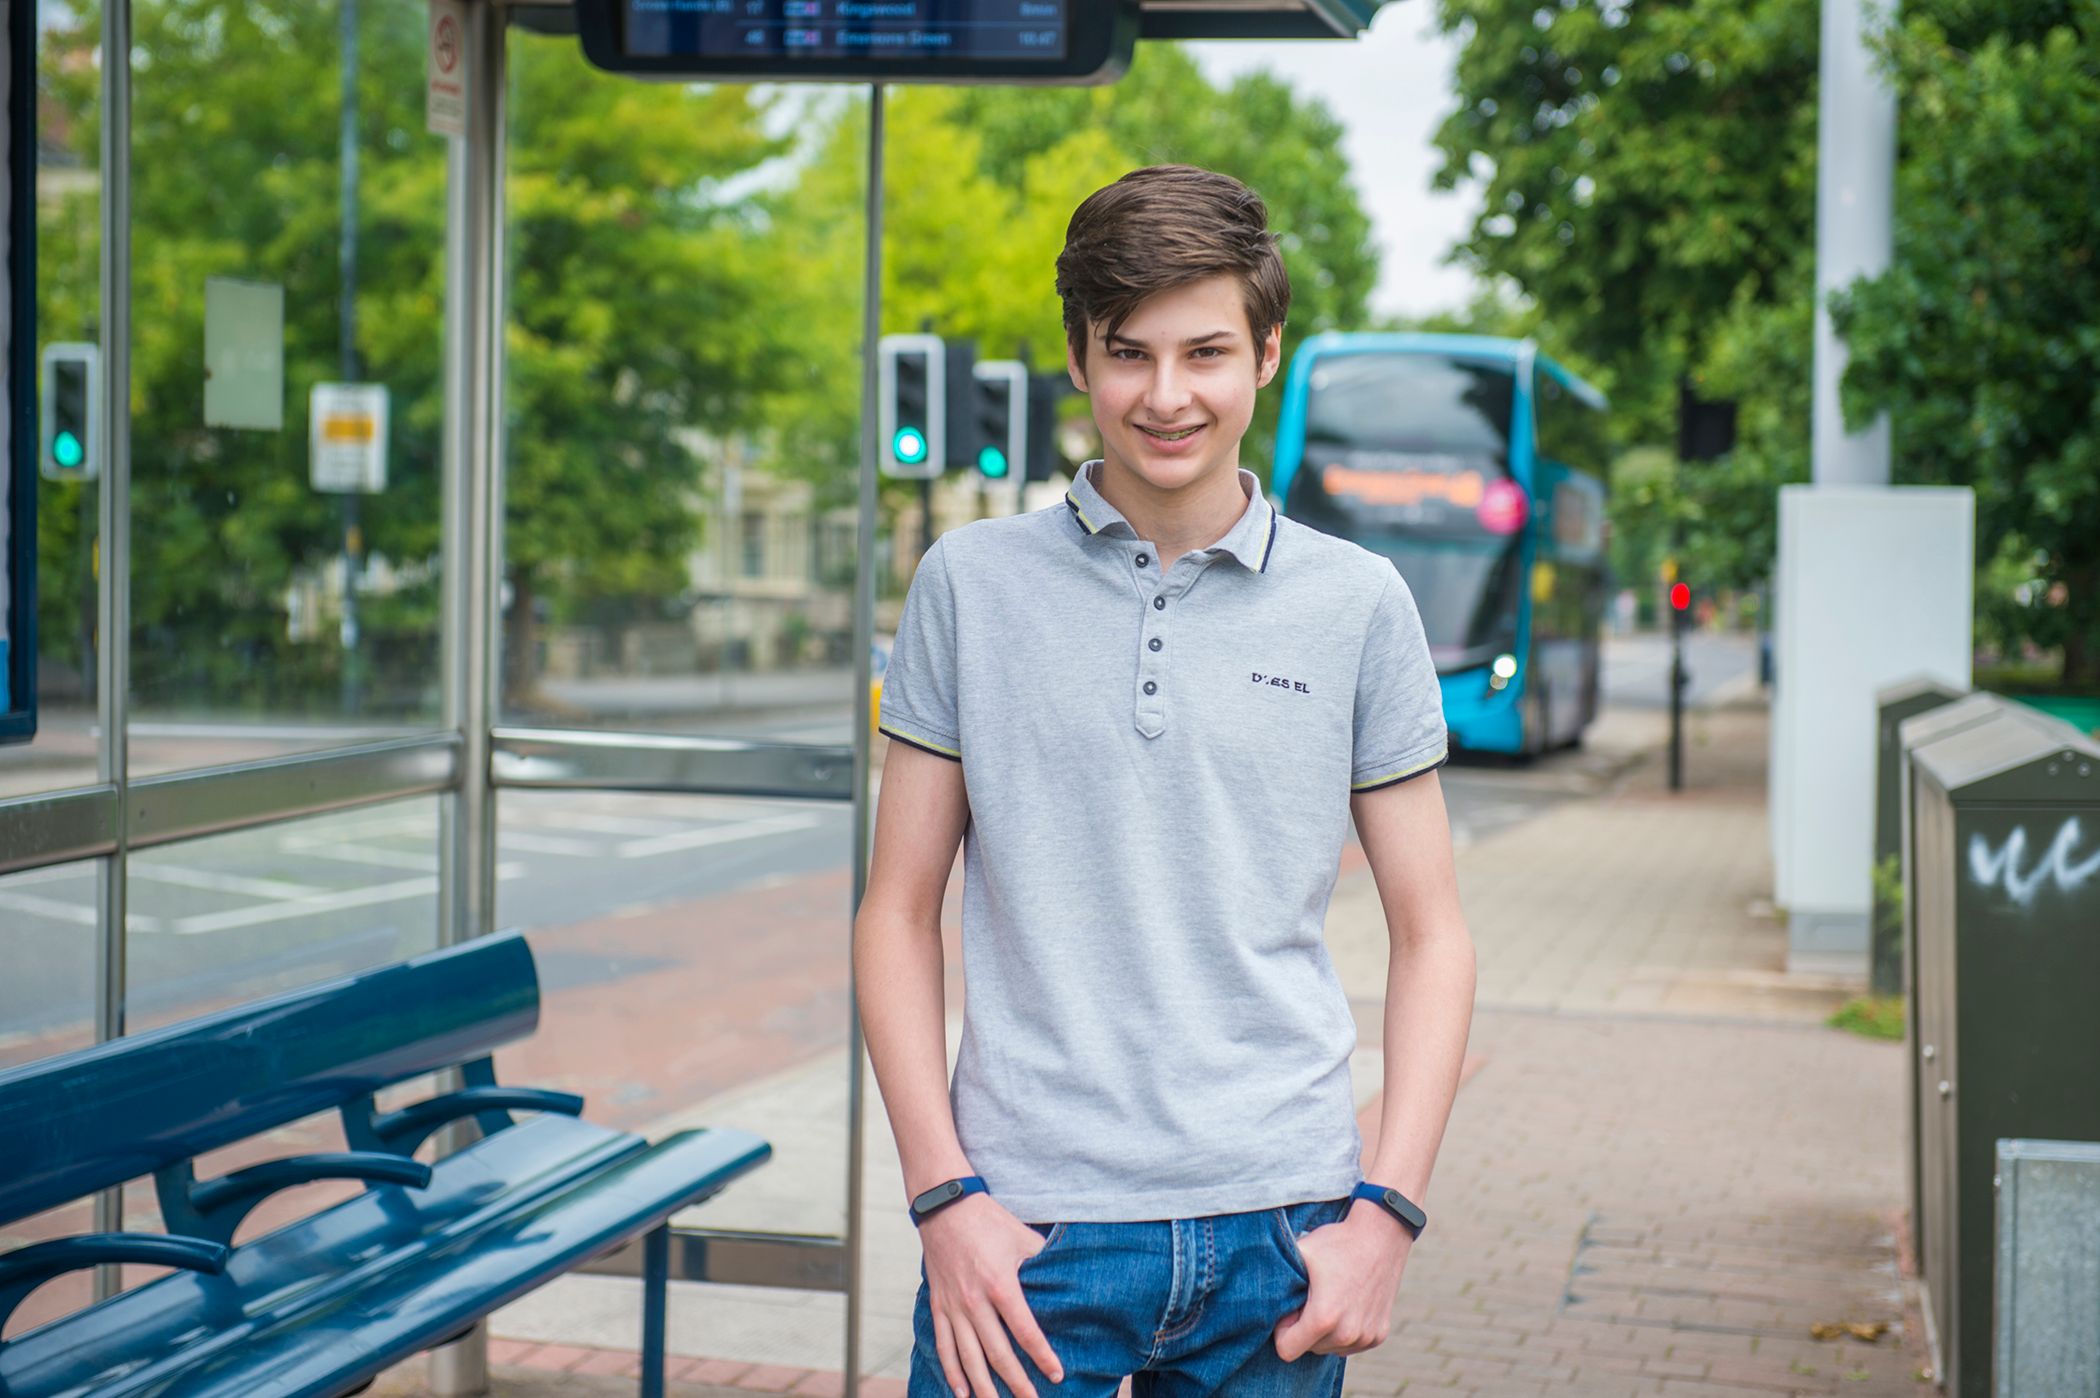 TEENAGE ENTREPRENEUR LAUNCHES WEARABLE TECH TO TACKLE COVID-19 TRANSMISSIONS FROM FACE TOUCHING